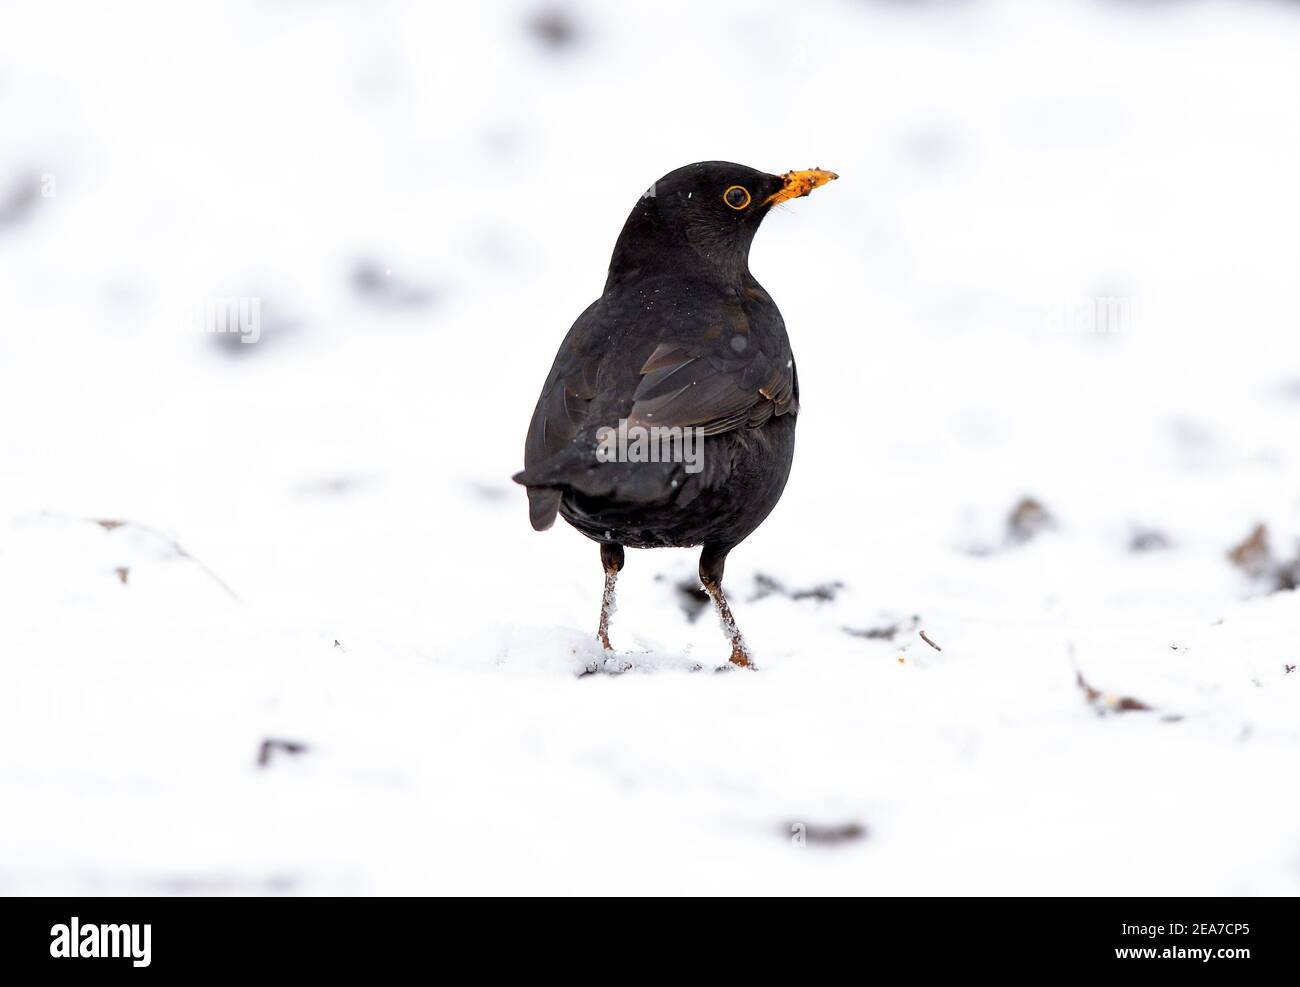 Leicester, Leicestershire, UK 8th Feb 2021. UK. Weather. Snow. A Blackbird in the snow in Leicestershire. Alex Hannam/Alamy Live News Stock Photo